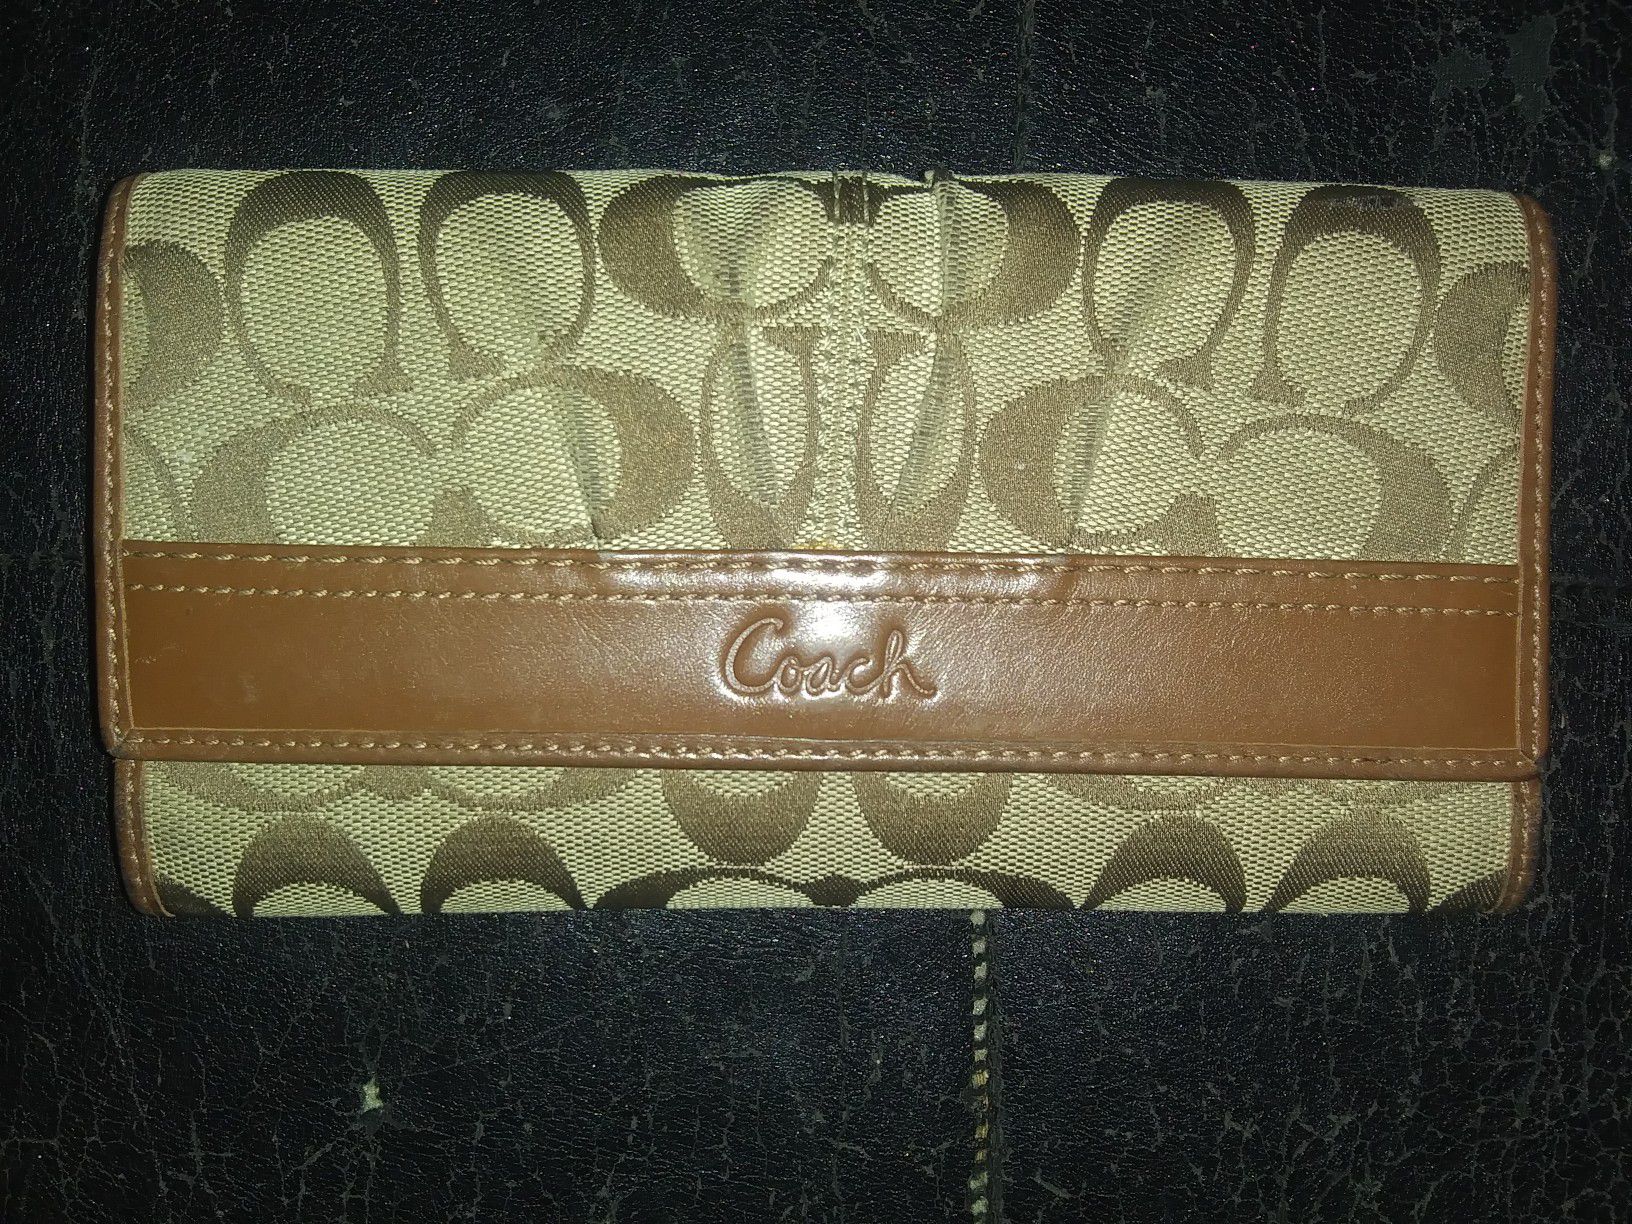 Tan and Brown Coach wallet